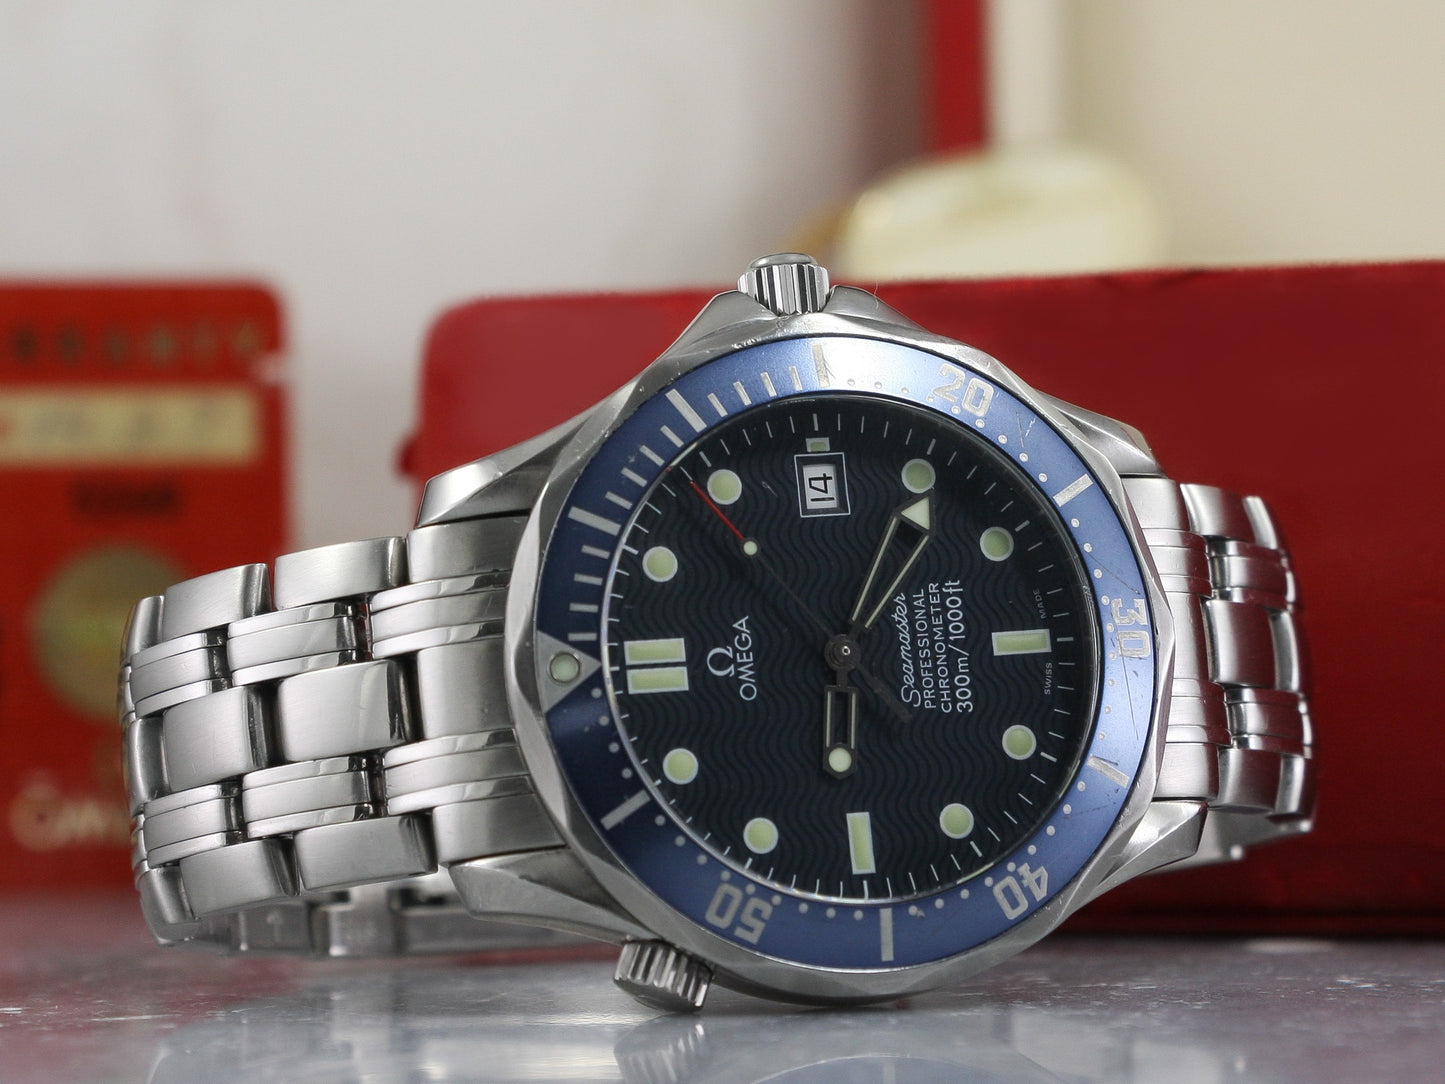 Omega Seamaster Professional Diver 300M Automatic 25318000 Steel - 41MM - Blue Dial - 2004